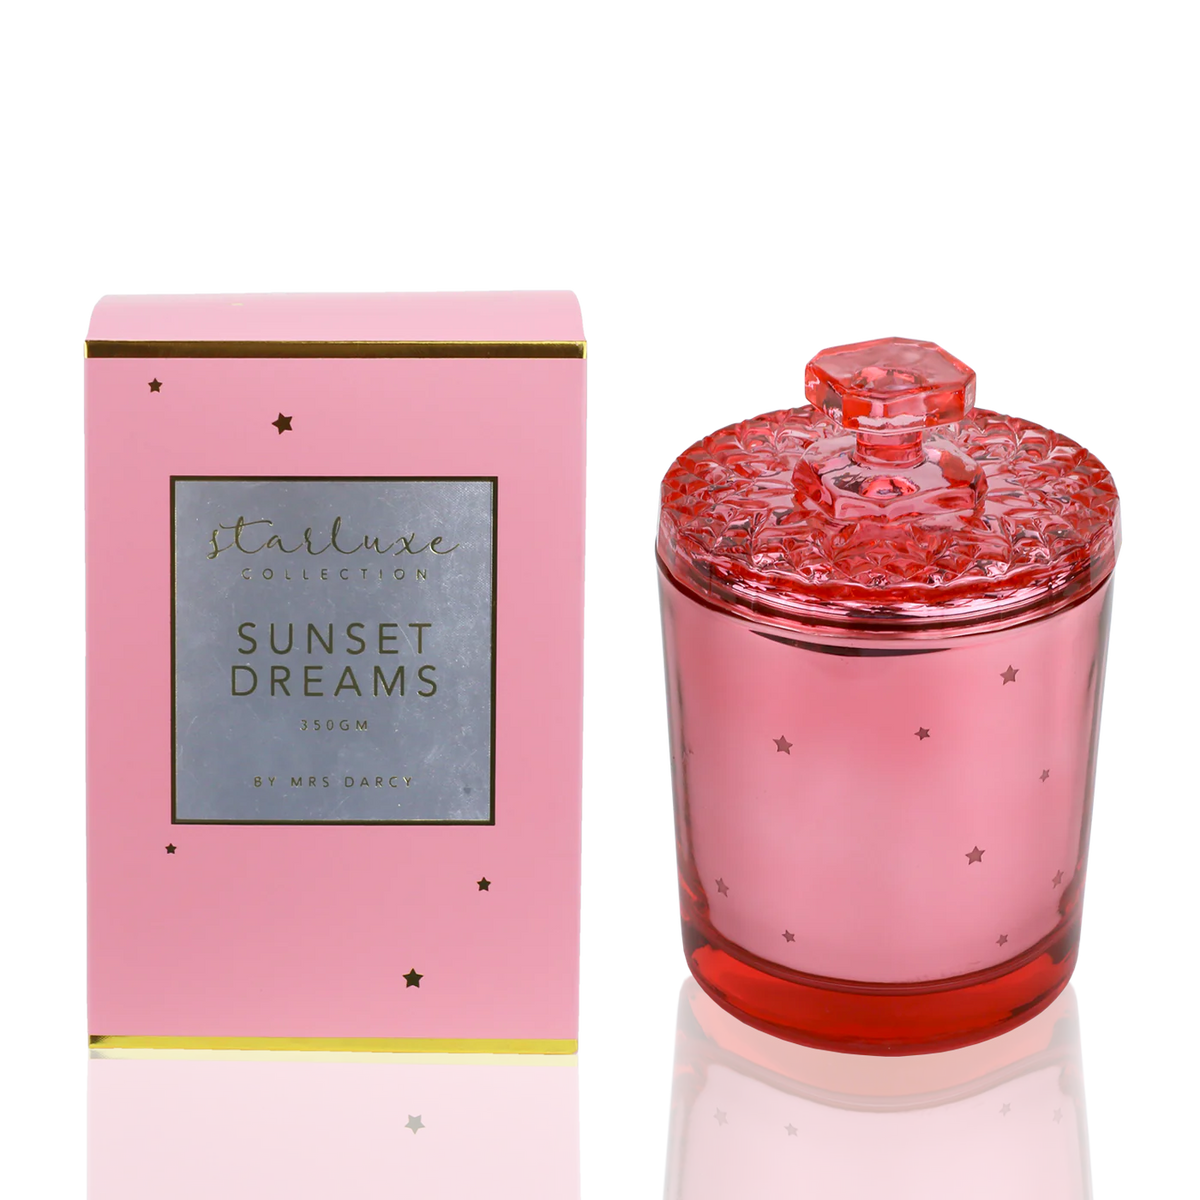 Candle | Star Luxe Mrs Darcy - Sunset Dreams